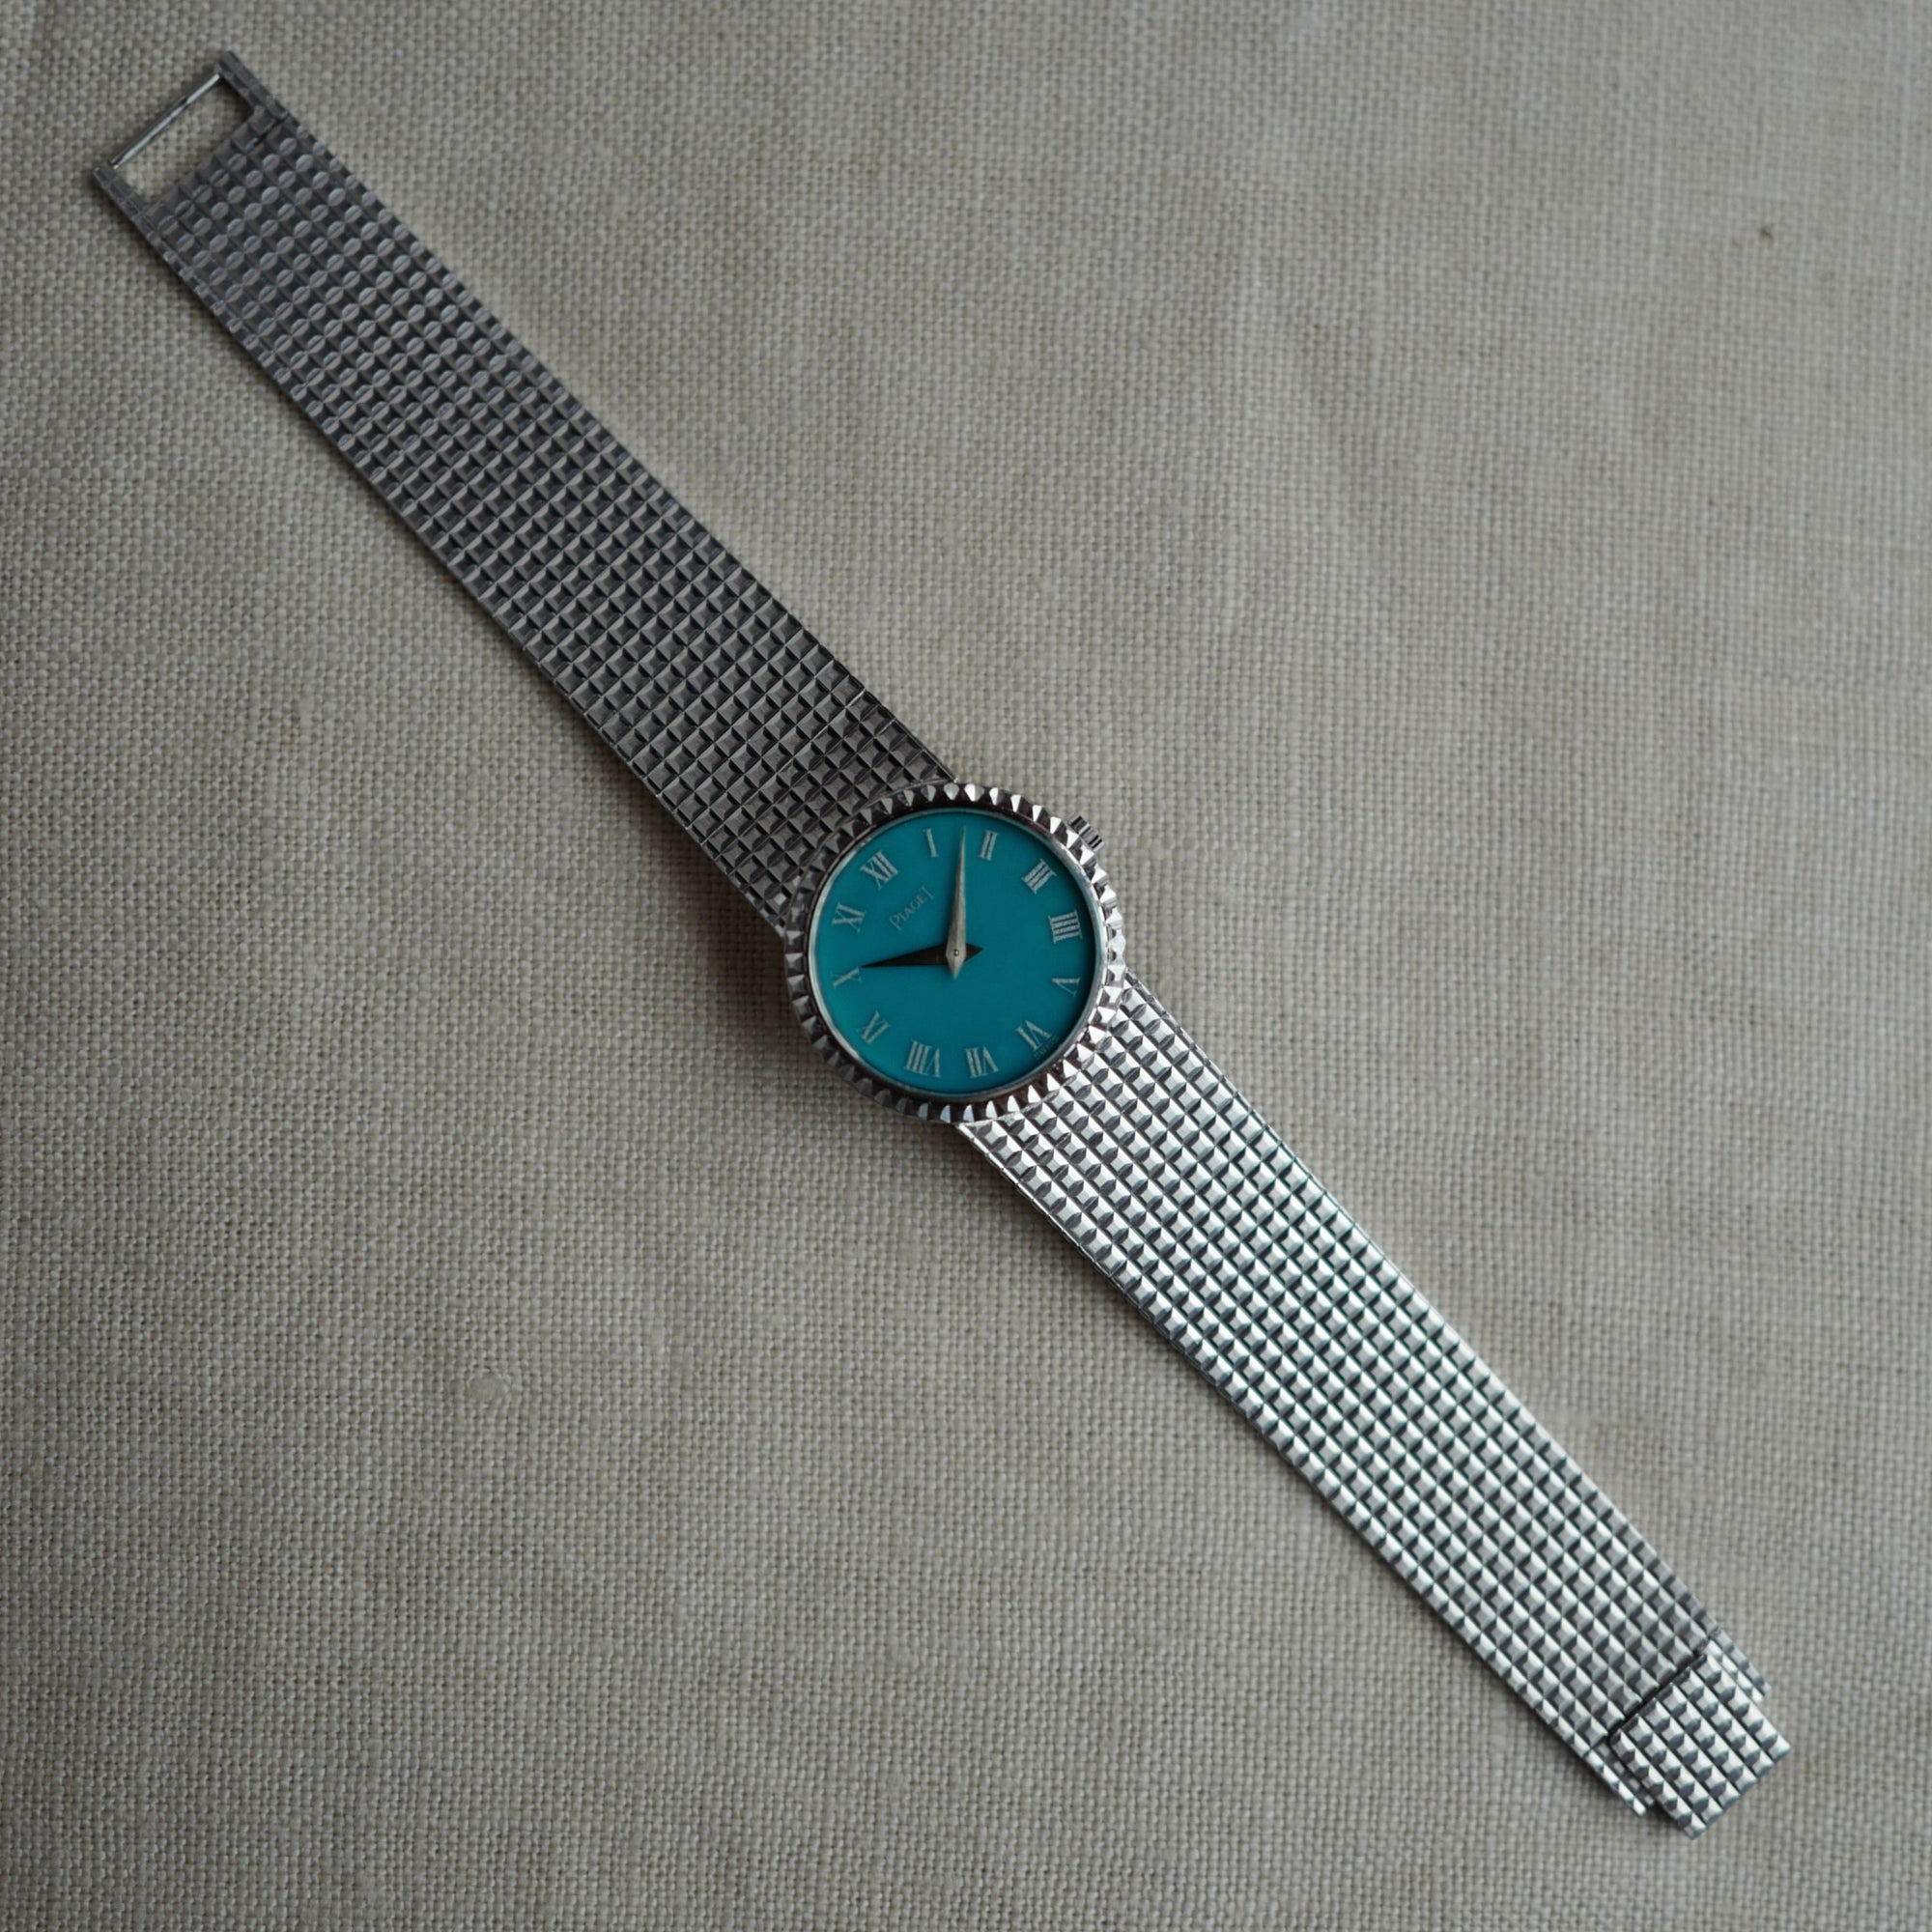 Piaget - Piaget White Gold Mechancial Watch Turquoise Dial Ref. 924N24 - The Keystone Watches